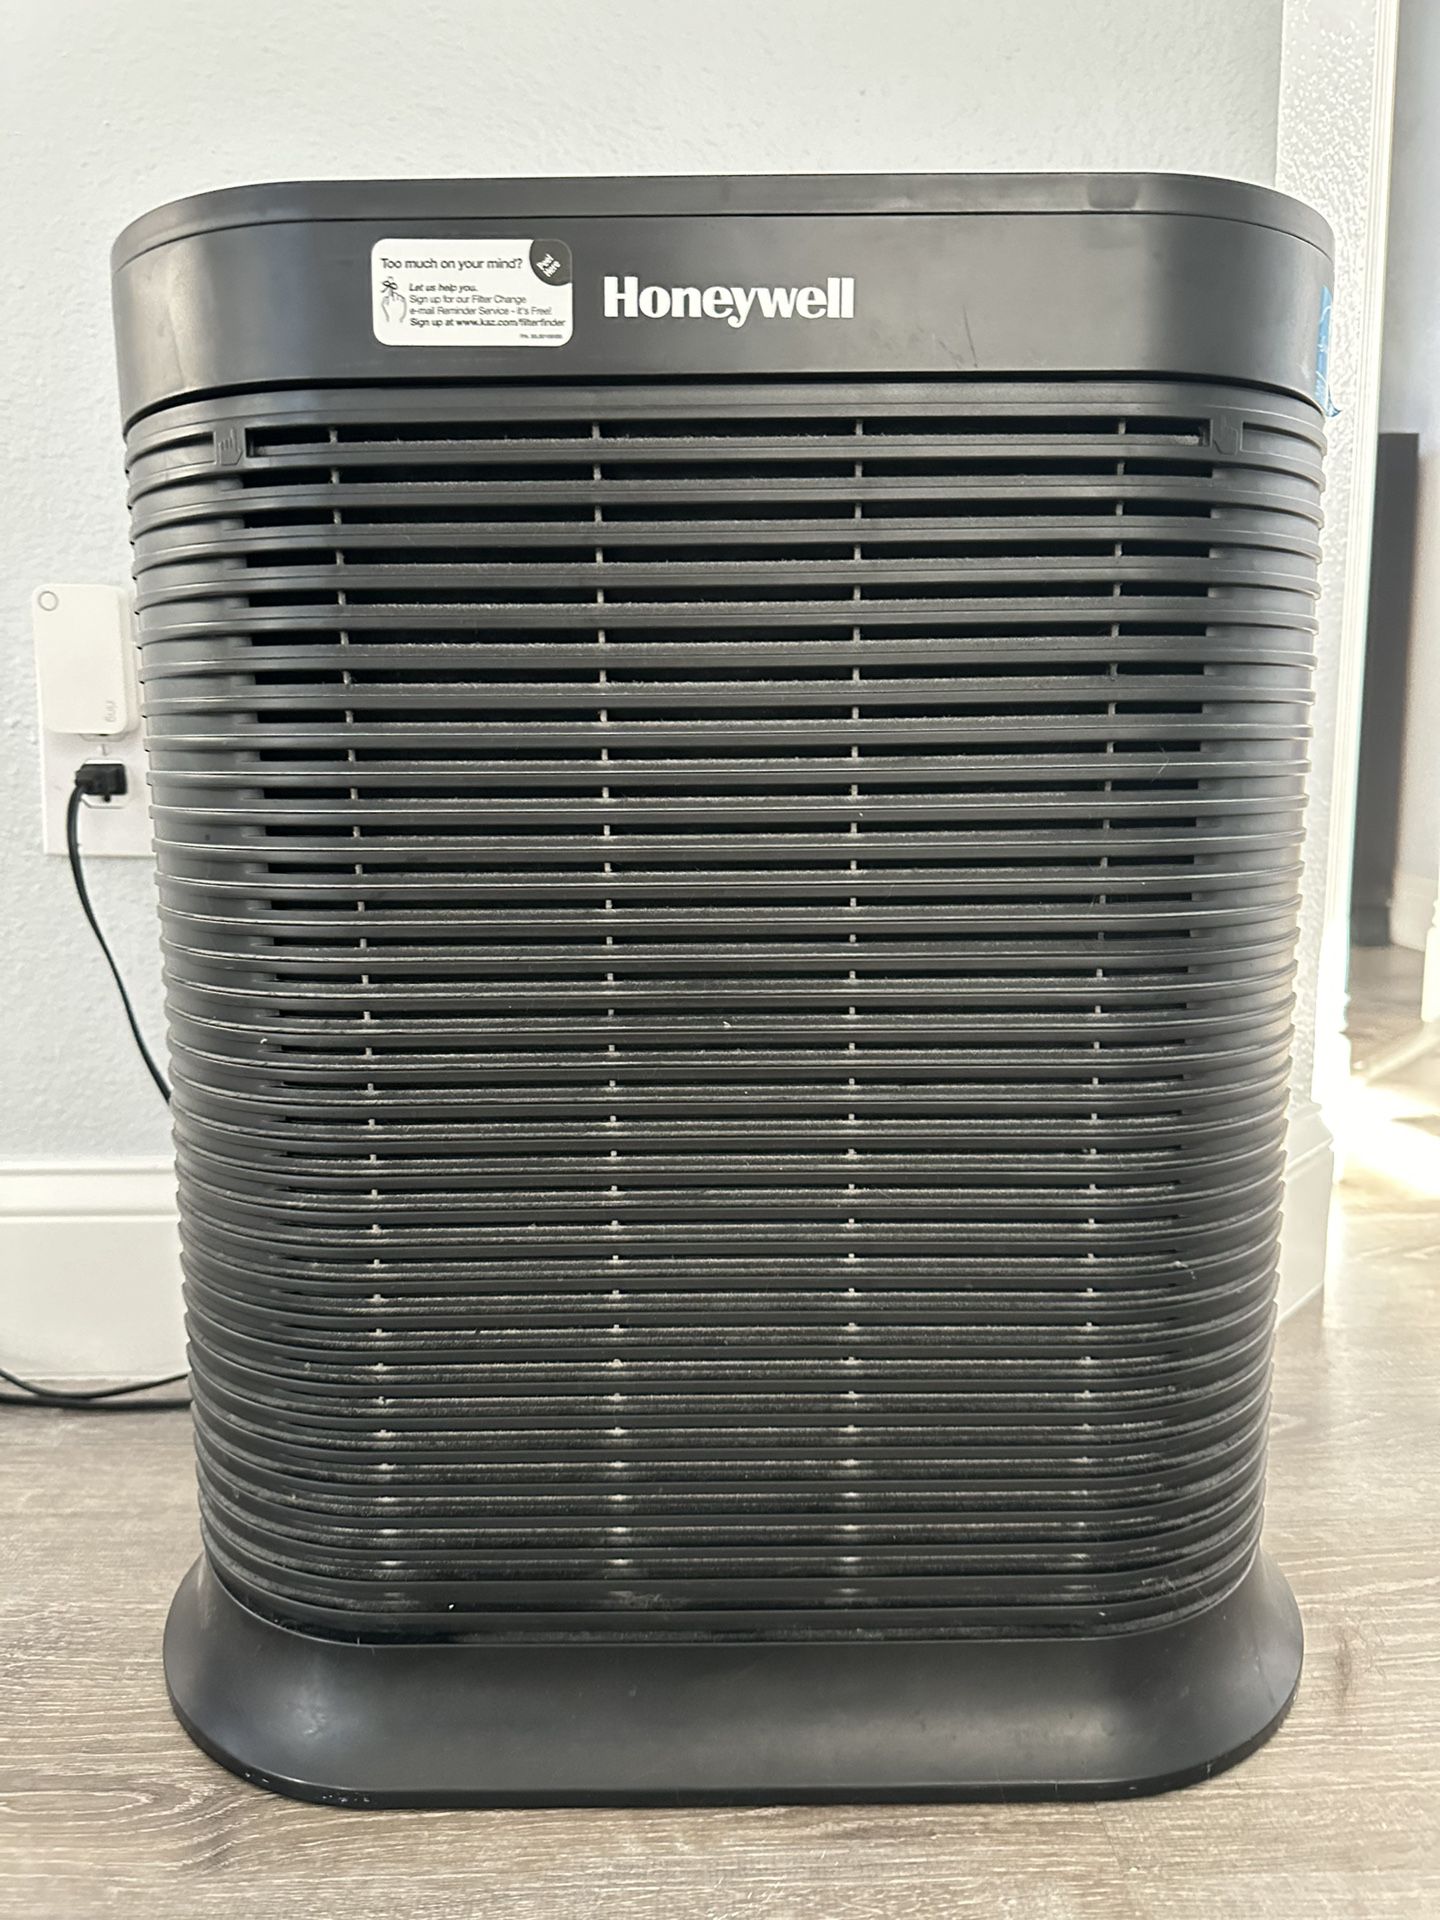 Air Purifier (Honeywell HPA300) Great Condition 